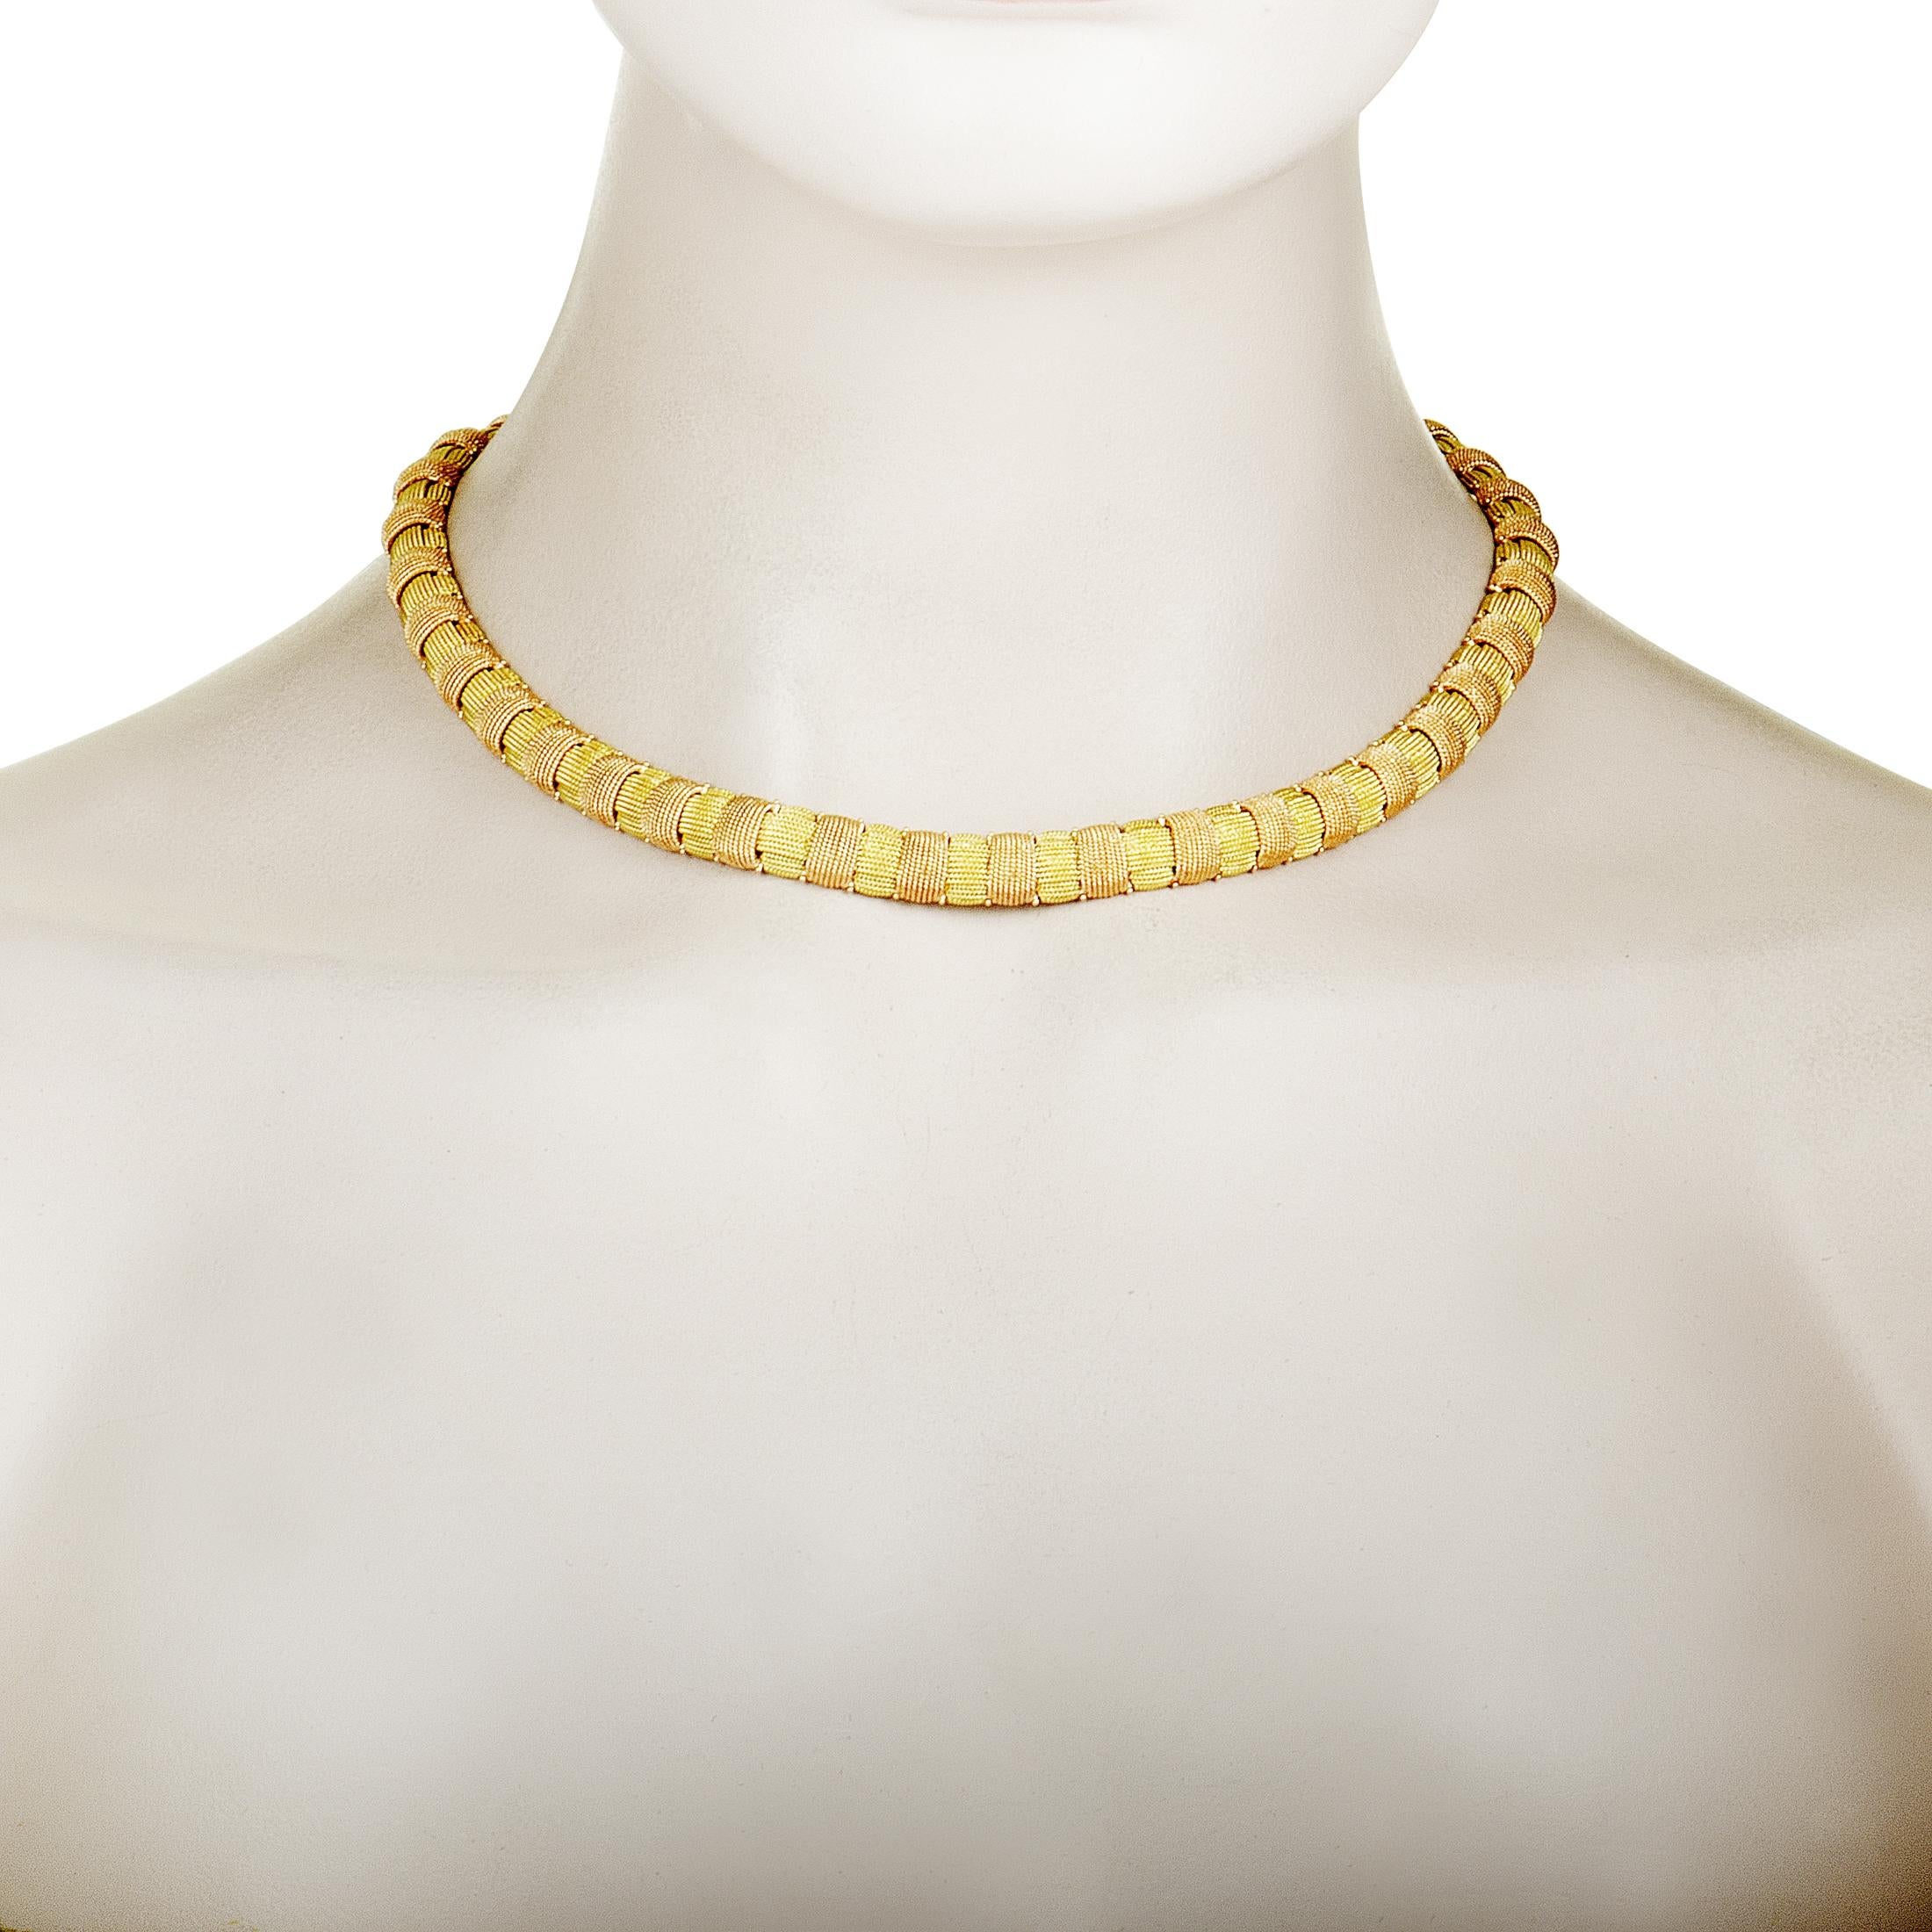 Boasting the incredibly intricate design that is the iconic feature of the renowned “Opera” collection, this fabulous Roberto Coin necklace offers a stunningly fashionable and exceptionally luxe look. The necklace is expertly crafted from 18K yellow